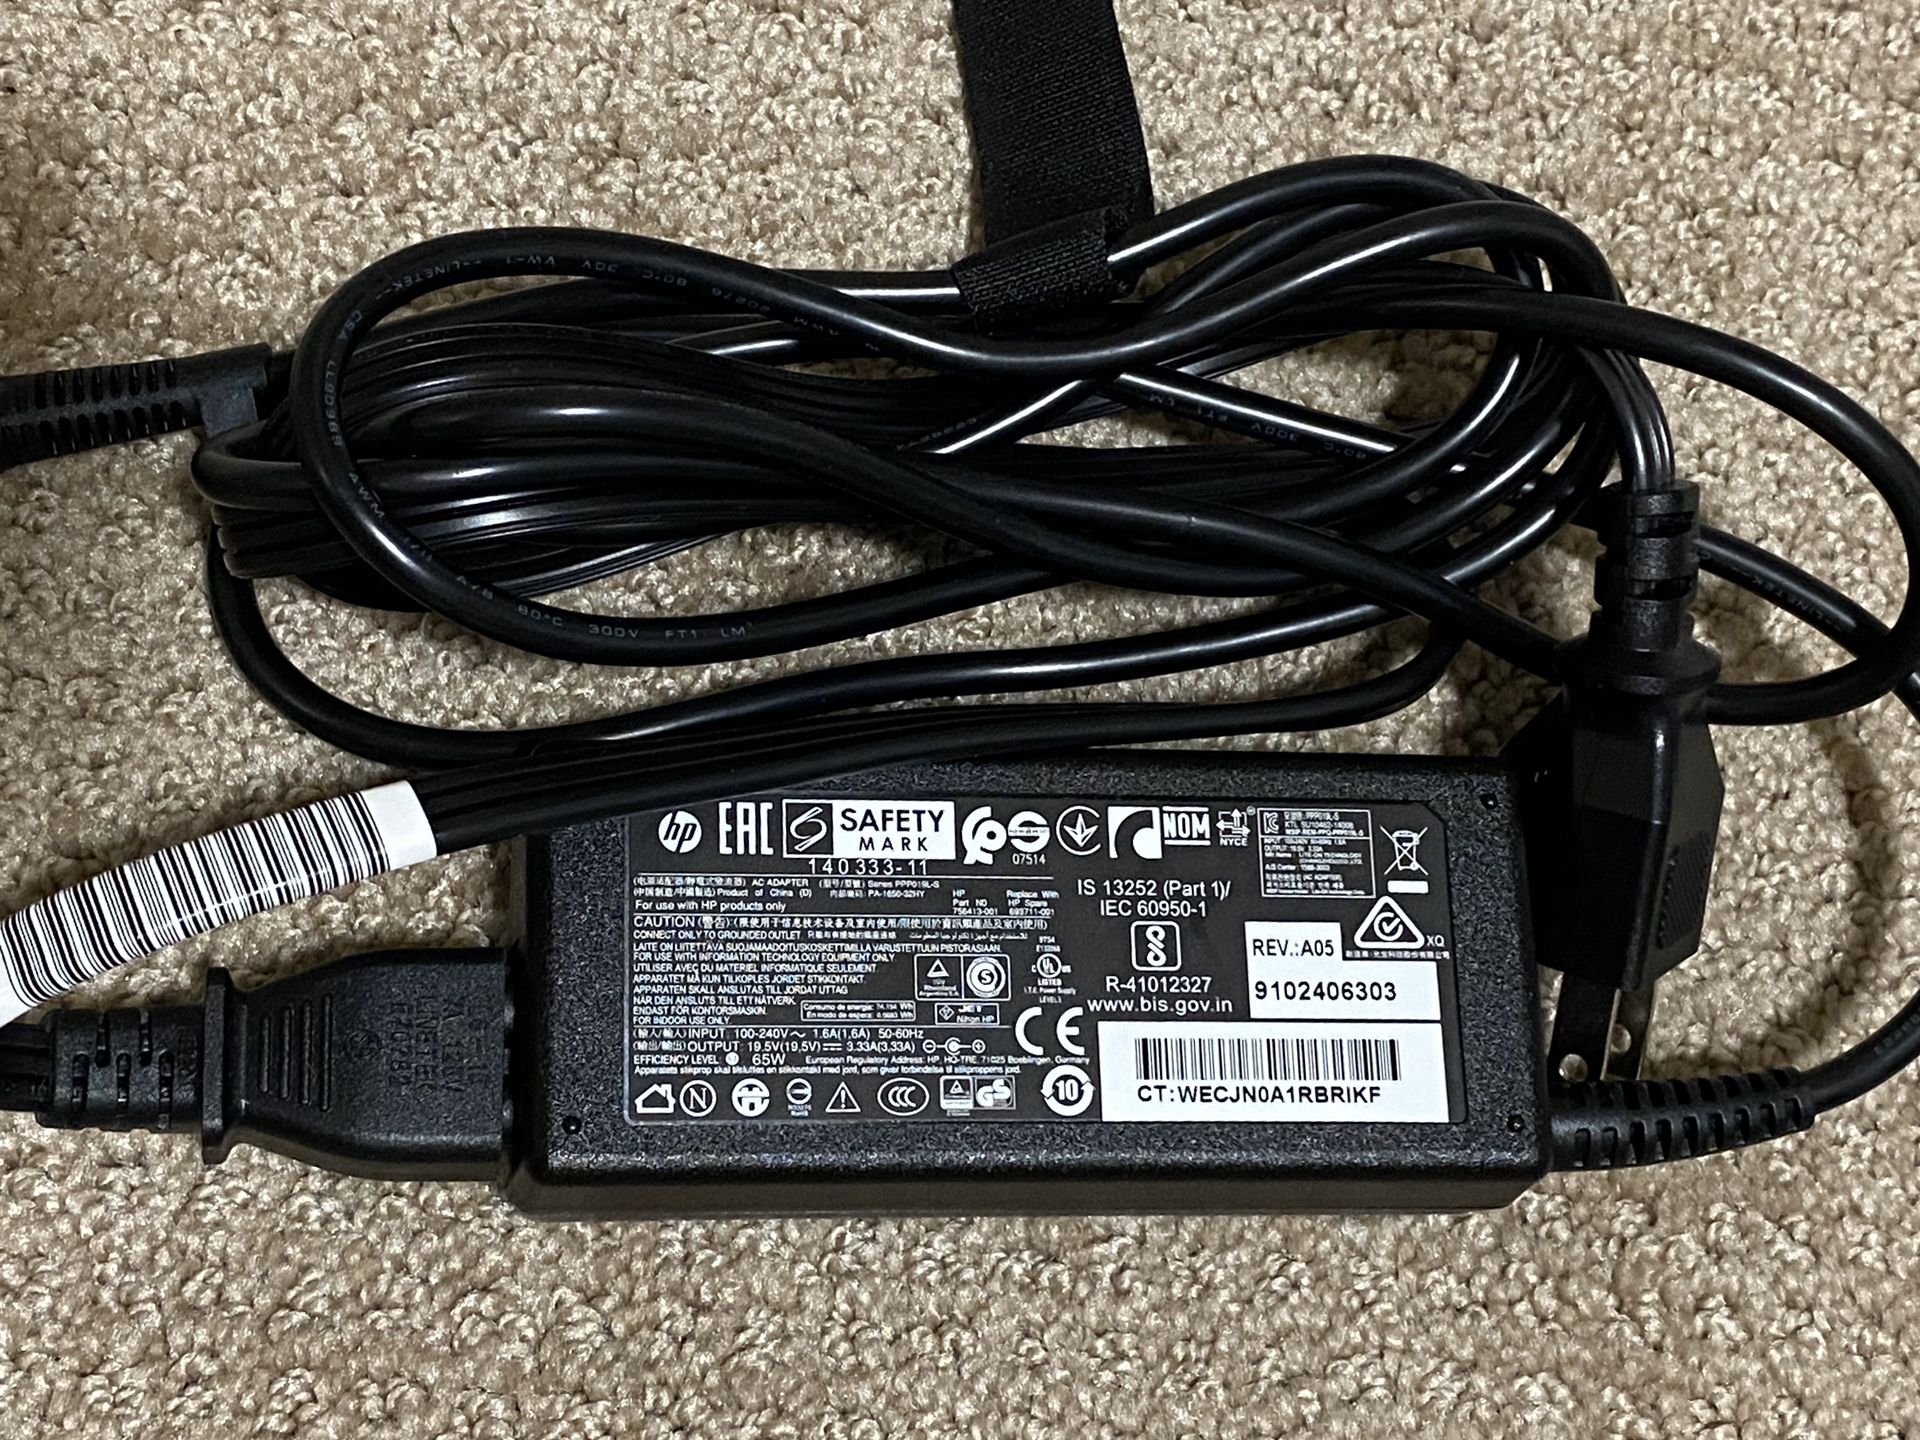 HP 65w laptop charger.